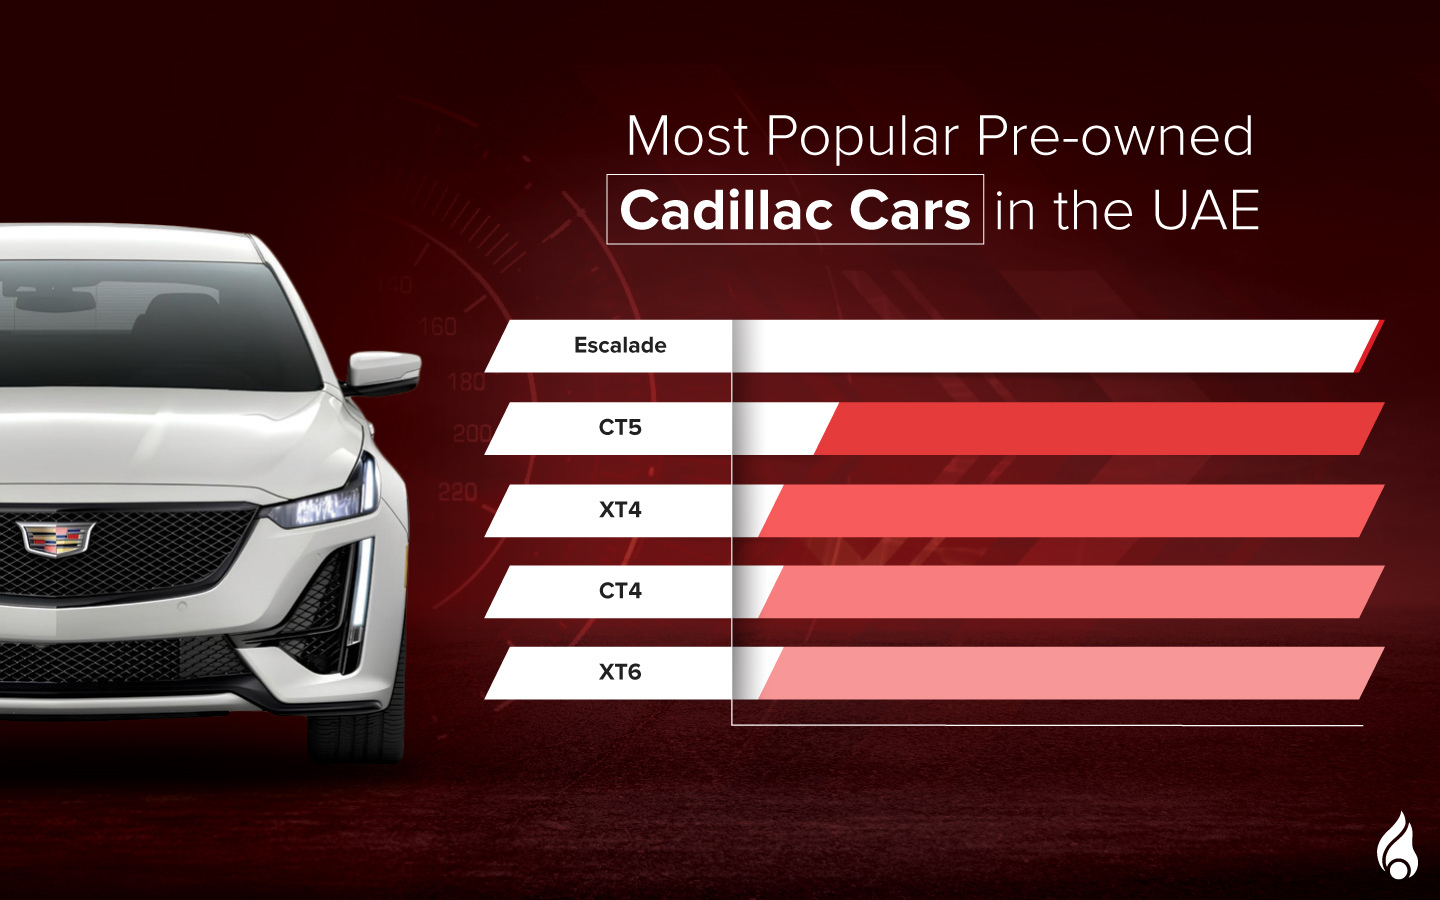 list of the top Cadillac used car models in the UAE